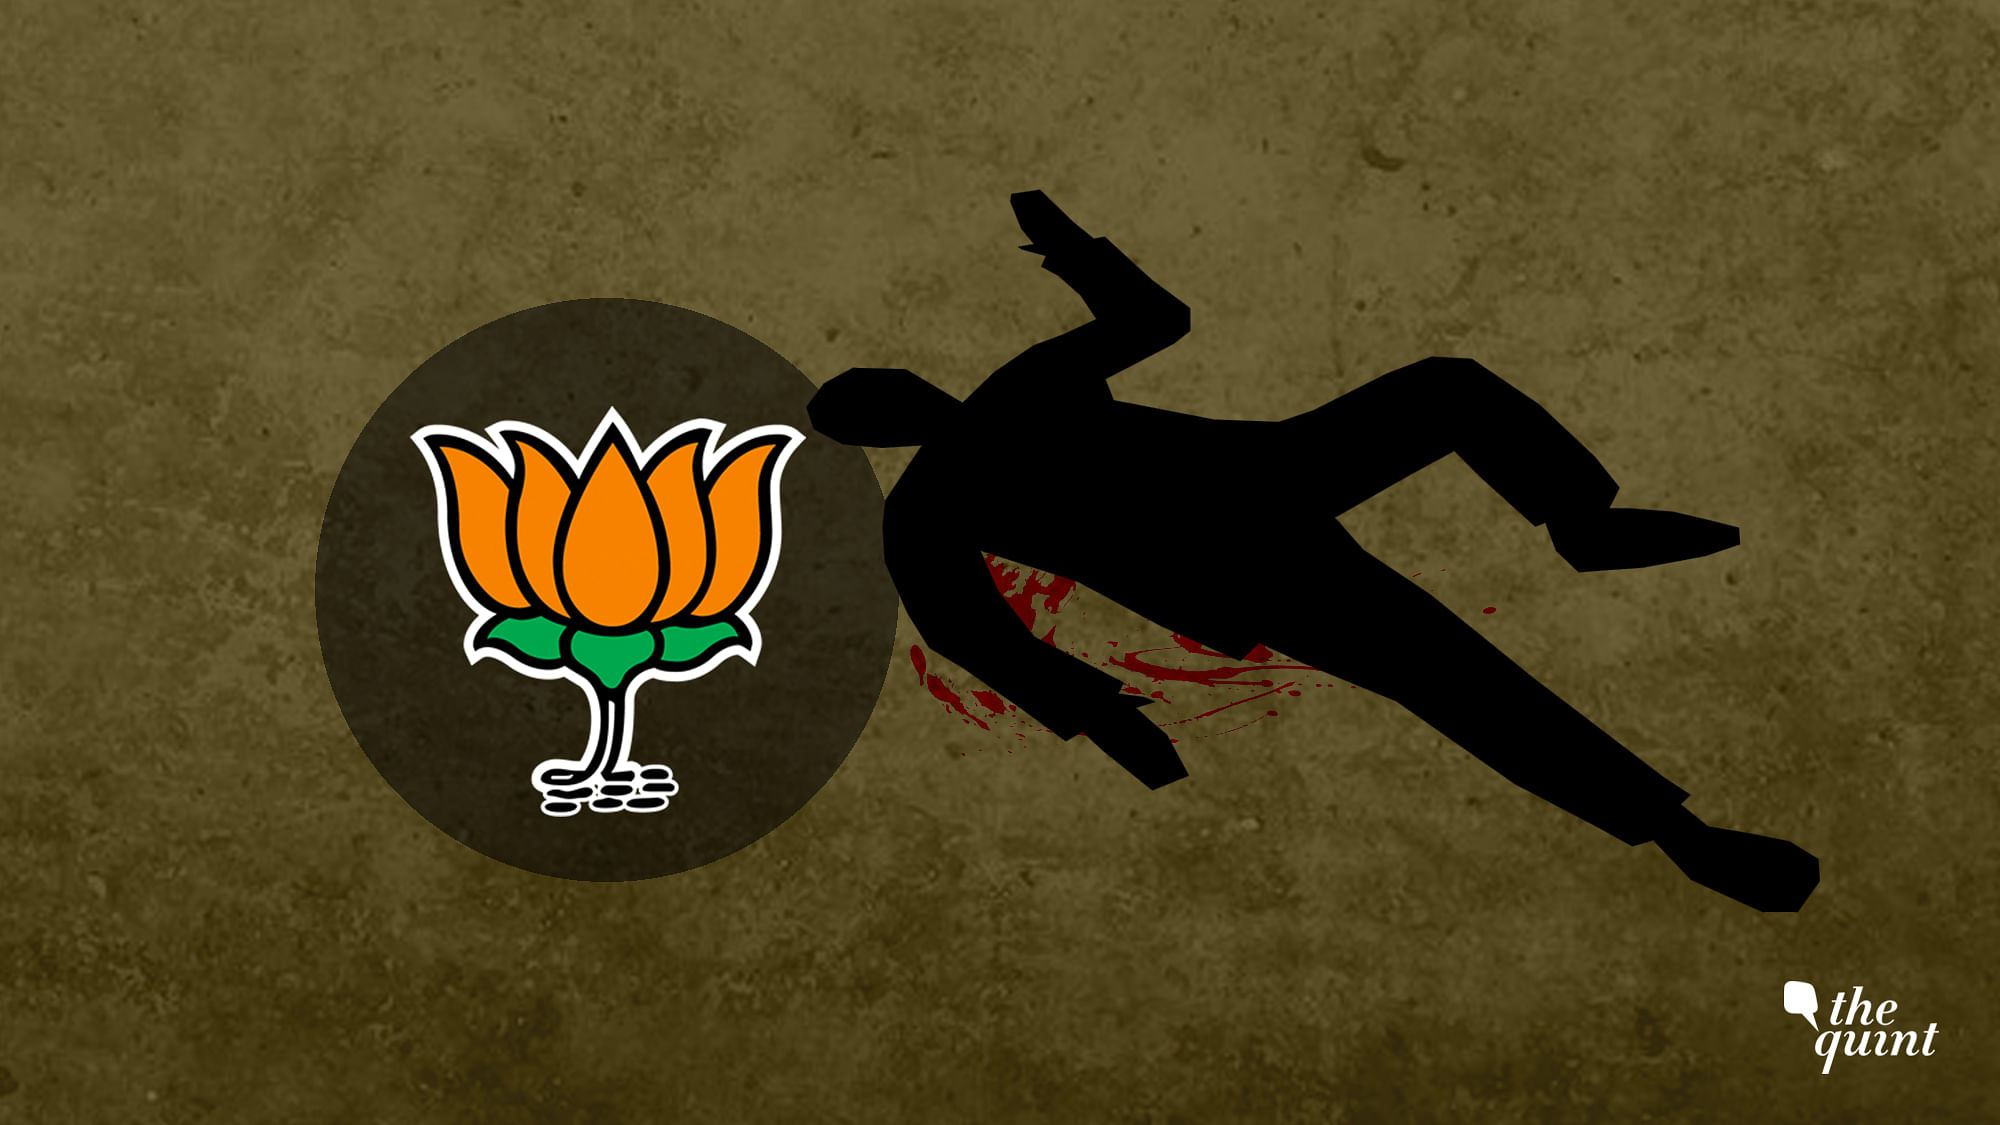 The BJP on 12 July claimed that Lalmohan and Deepak Mahato from Bengal’s Purulia district were hacked to death by the Trinamool Congress. However, their family tells <b>The Quint </b>that neither were they BJP workers, nor were their deaths political.